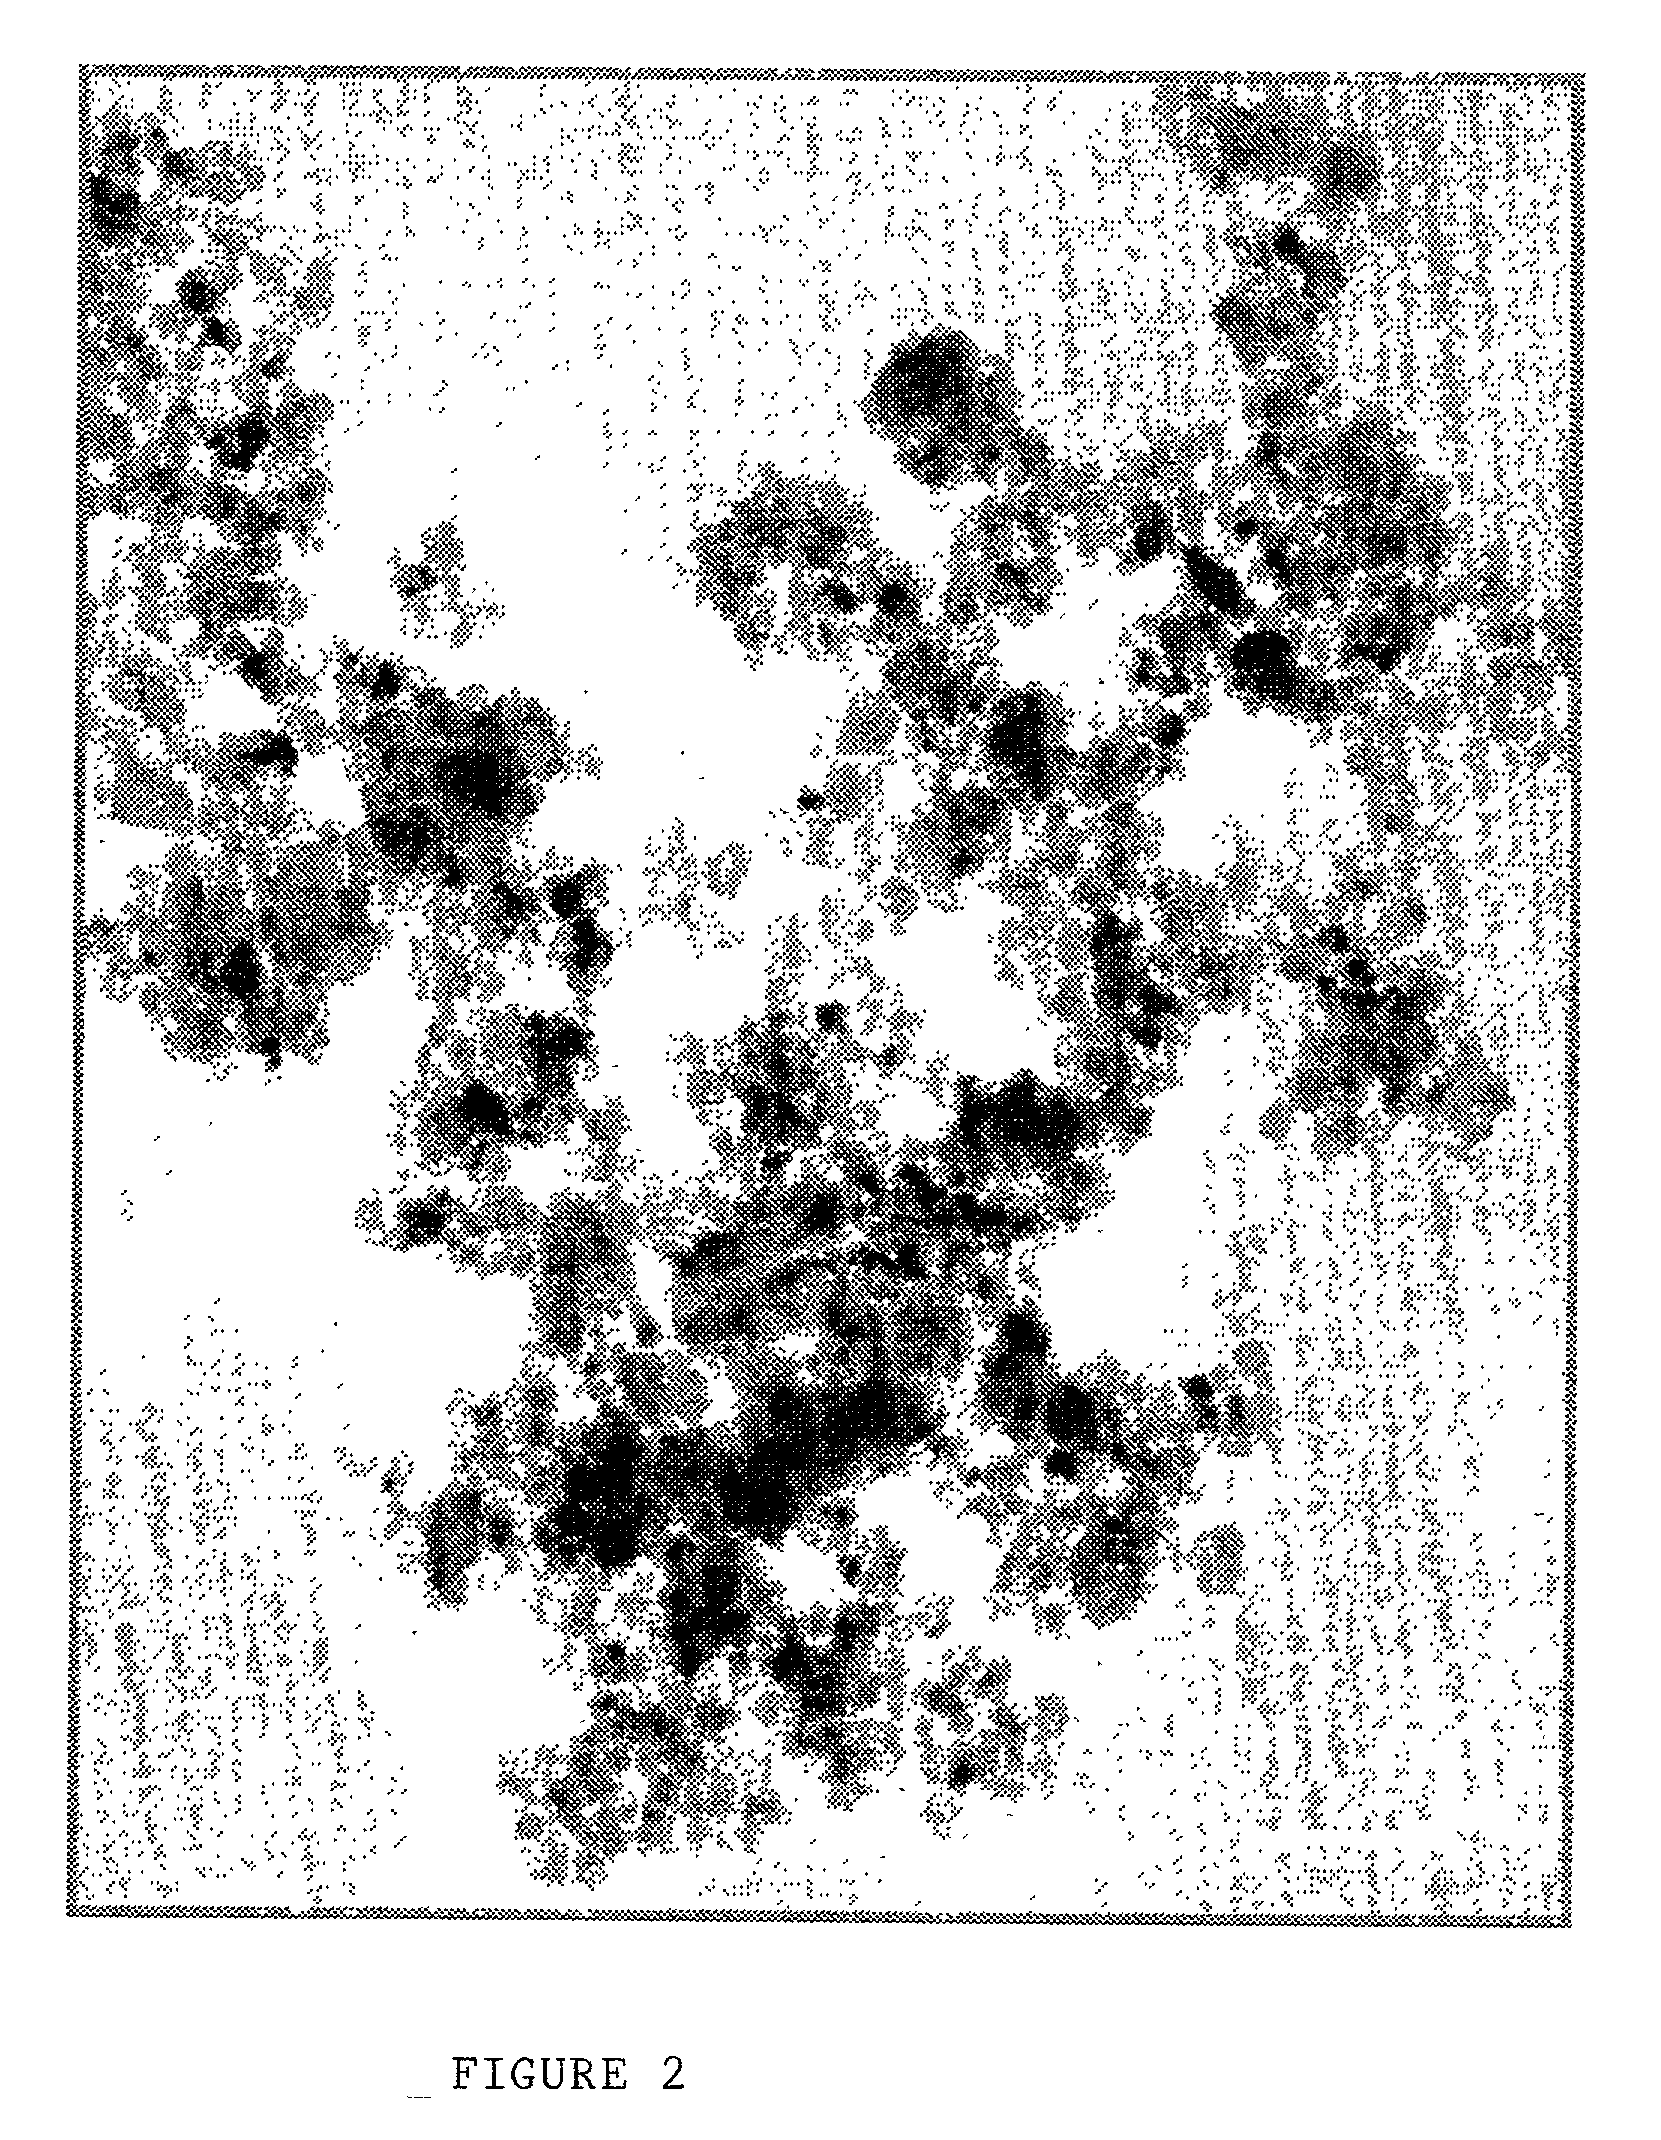 Superfine powders and methods for manufacture of said powders